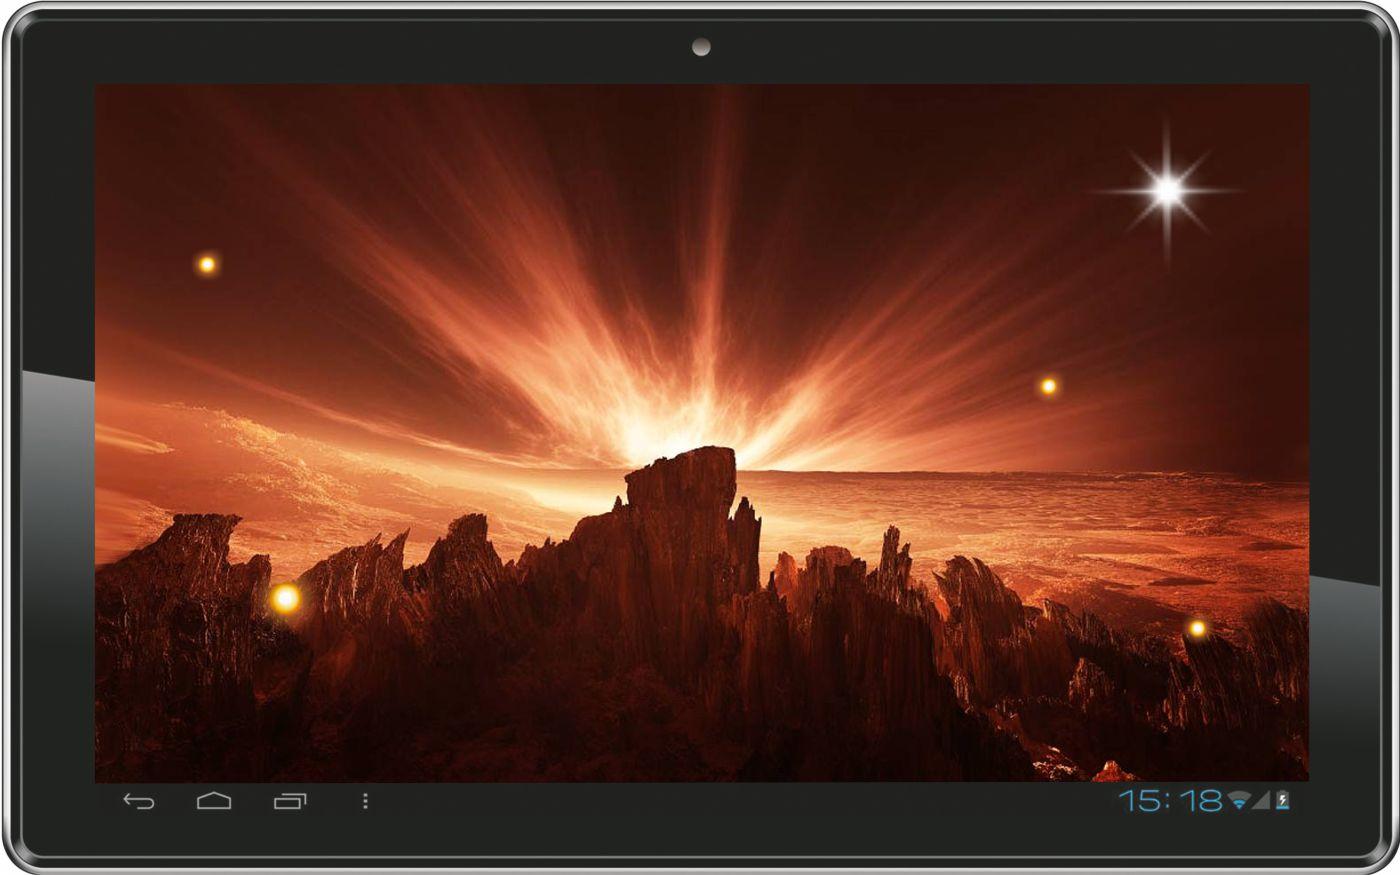 Mars Surface Hq Live Wallpaper Android Apps On Google Play